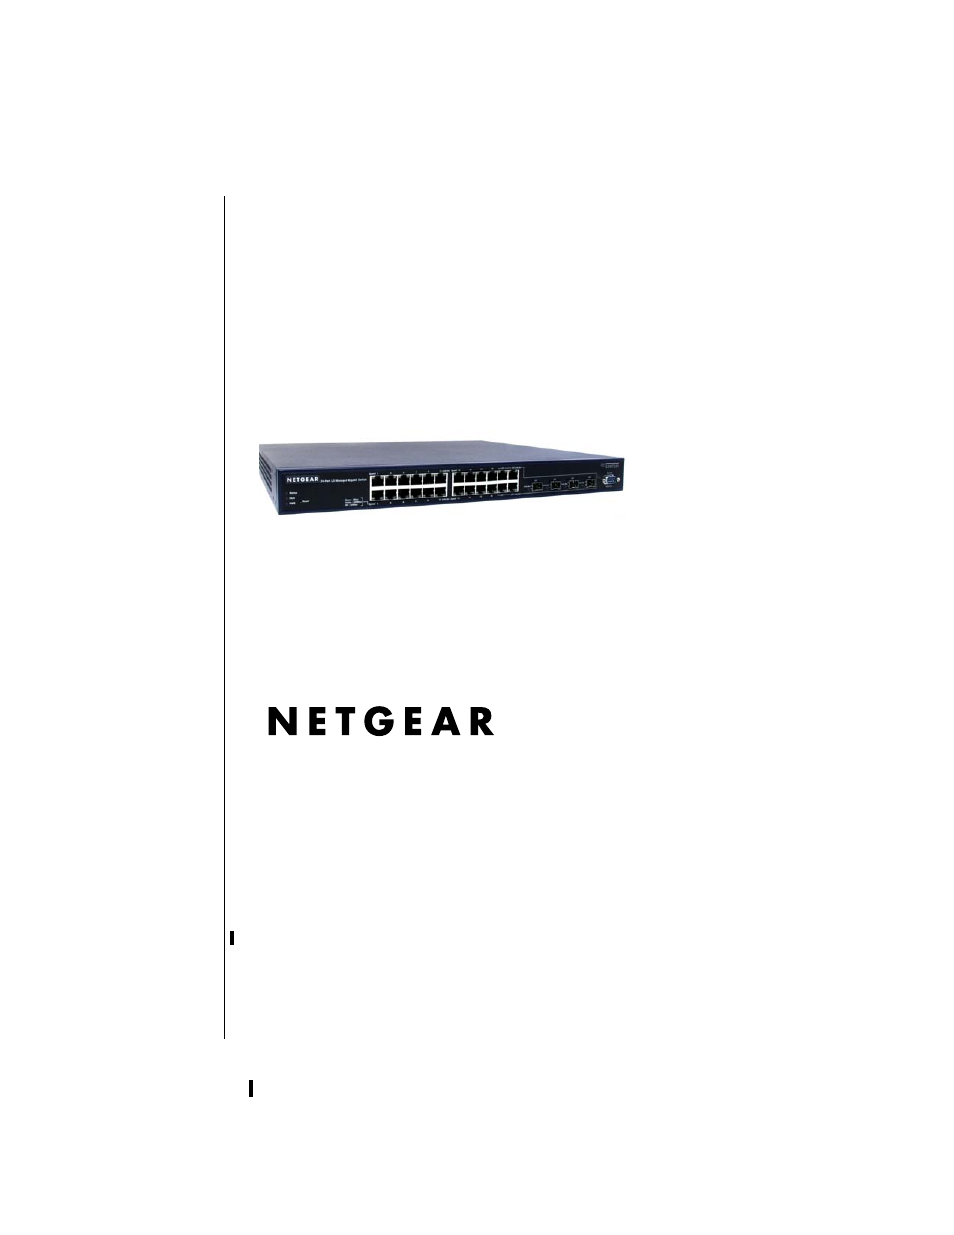 NETGEAR 7300 Series User Manual | 364 pages